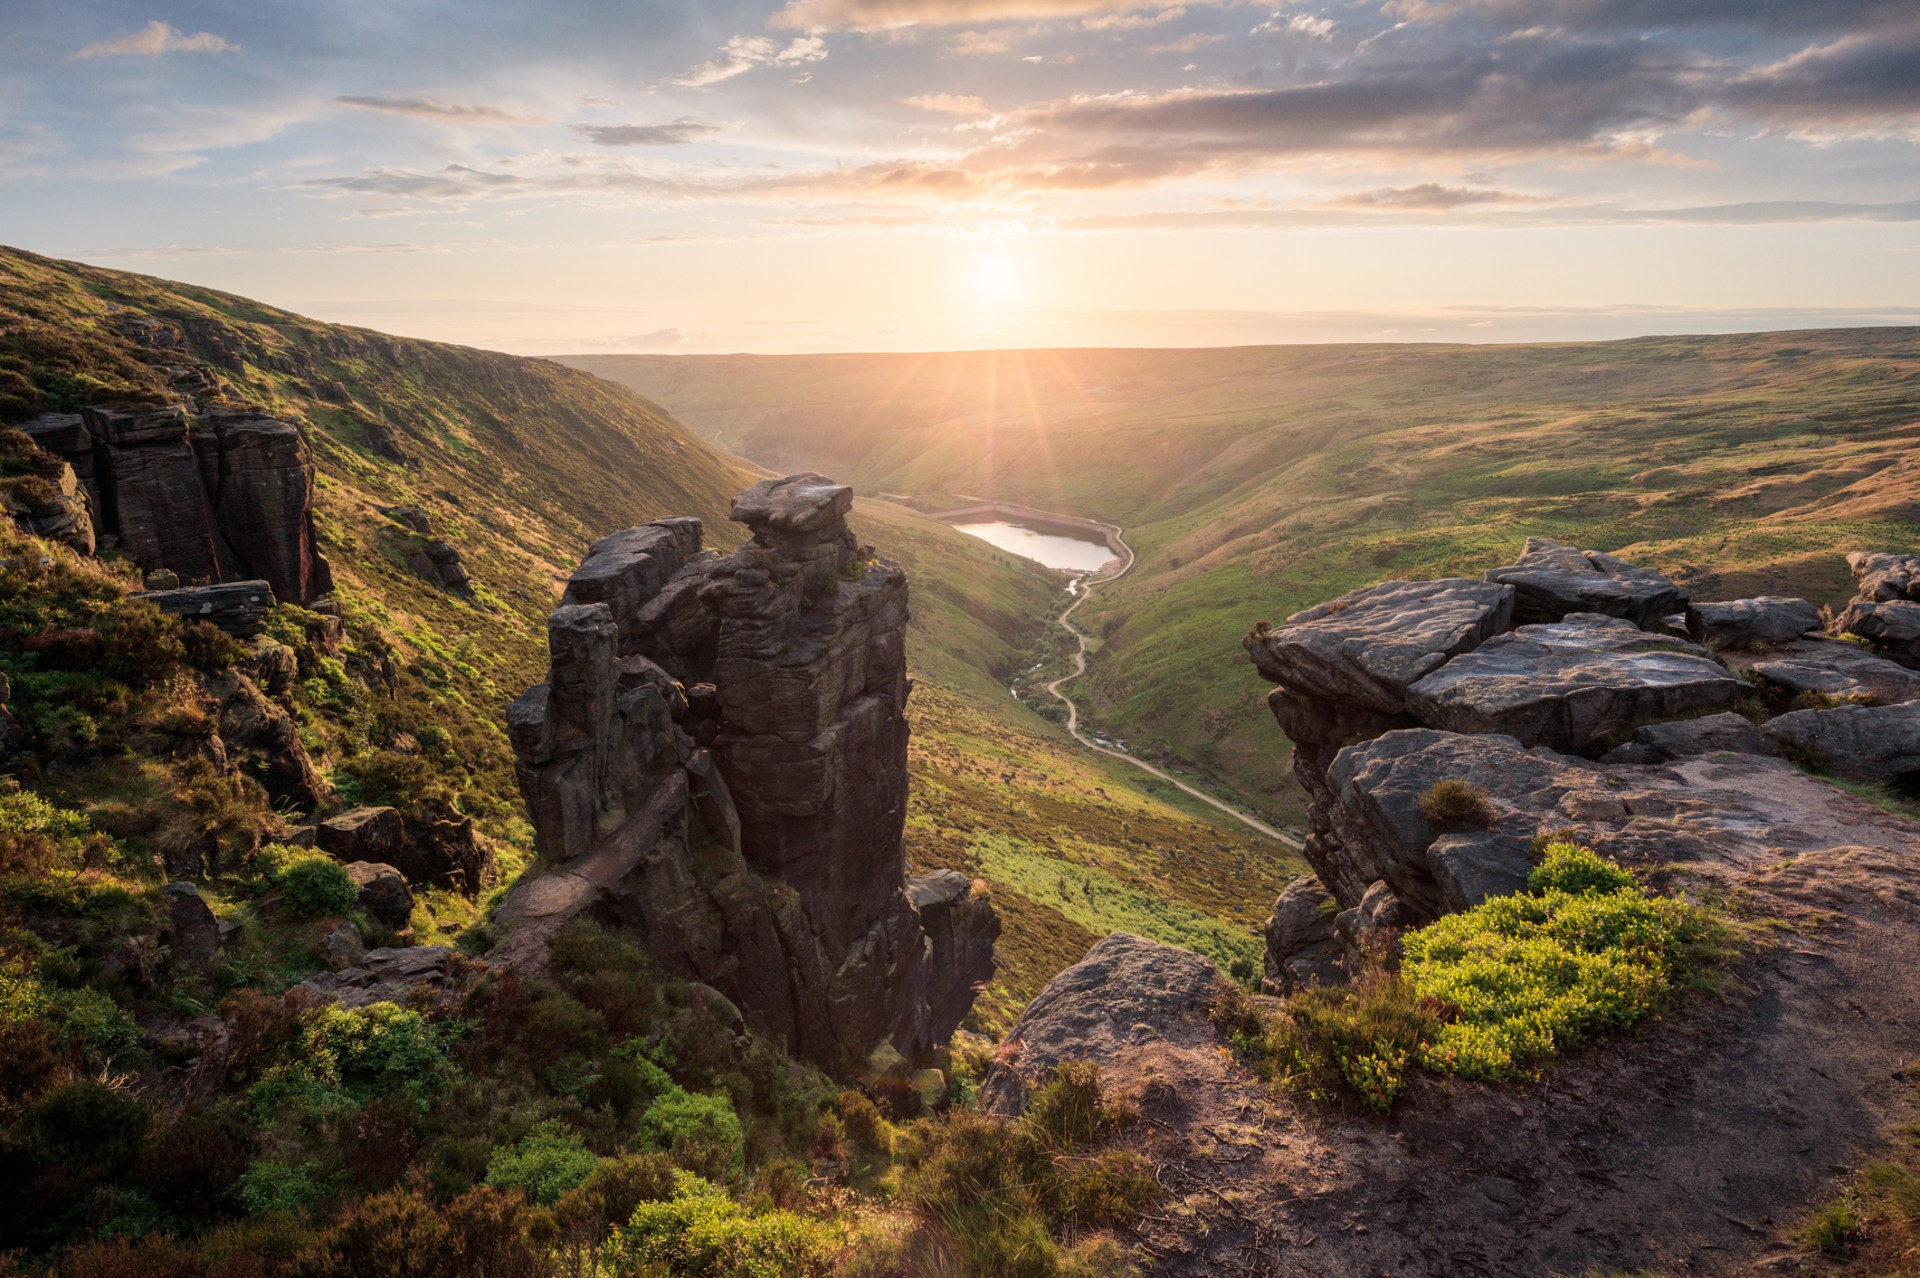 escape london with a trip to the uk's 'best' national park with 'striking' countryside